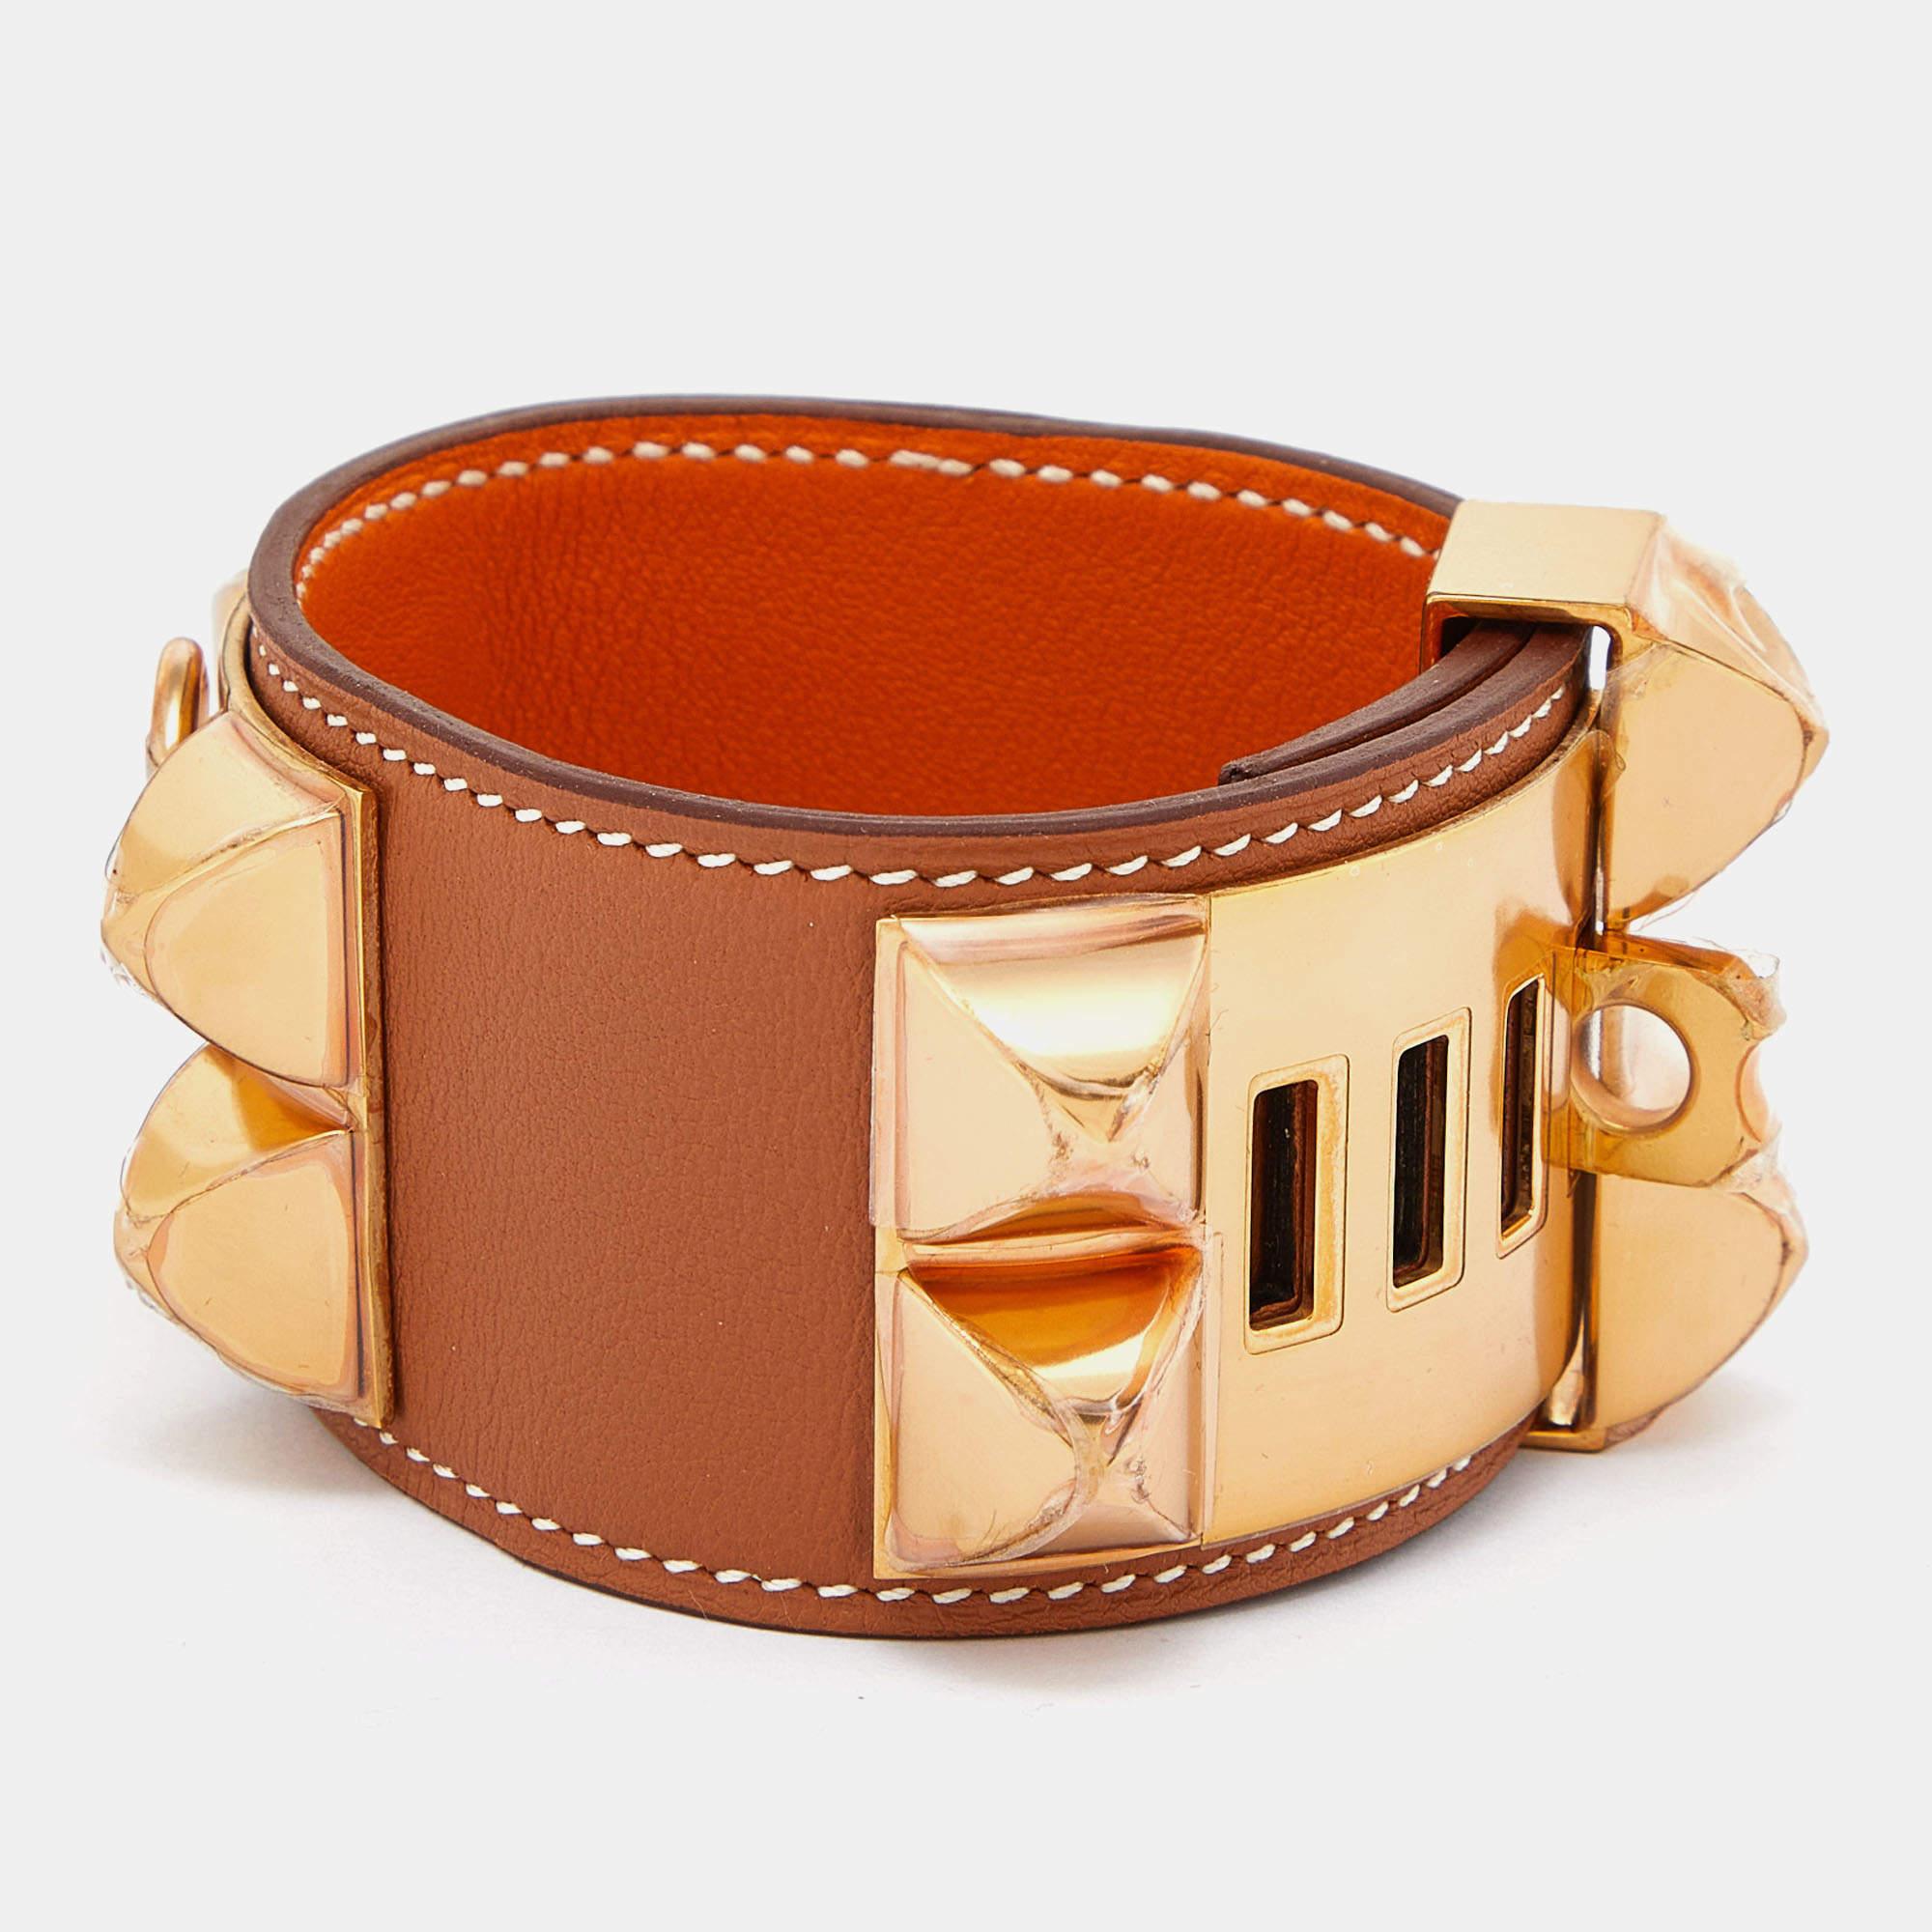 This instantly recognizable bracelet is from the signature Collier de Chien collection of Hermès. The bracelet, made of brown leather, is adorned with the iconic Collier de Chien motif in gold-plated metal featuring pyramid studs and a ring. This